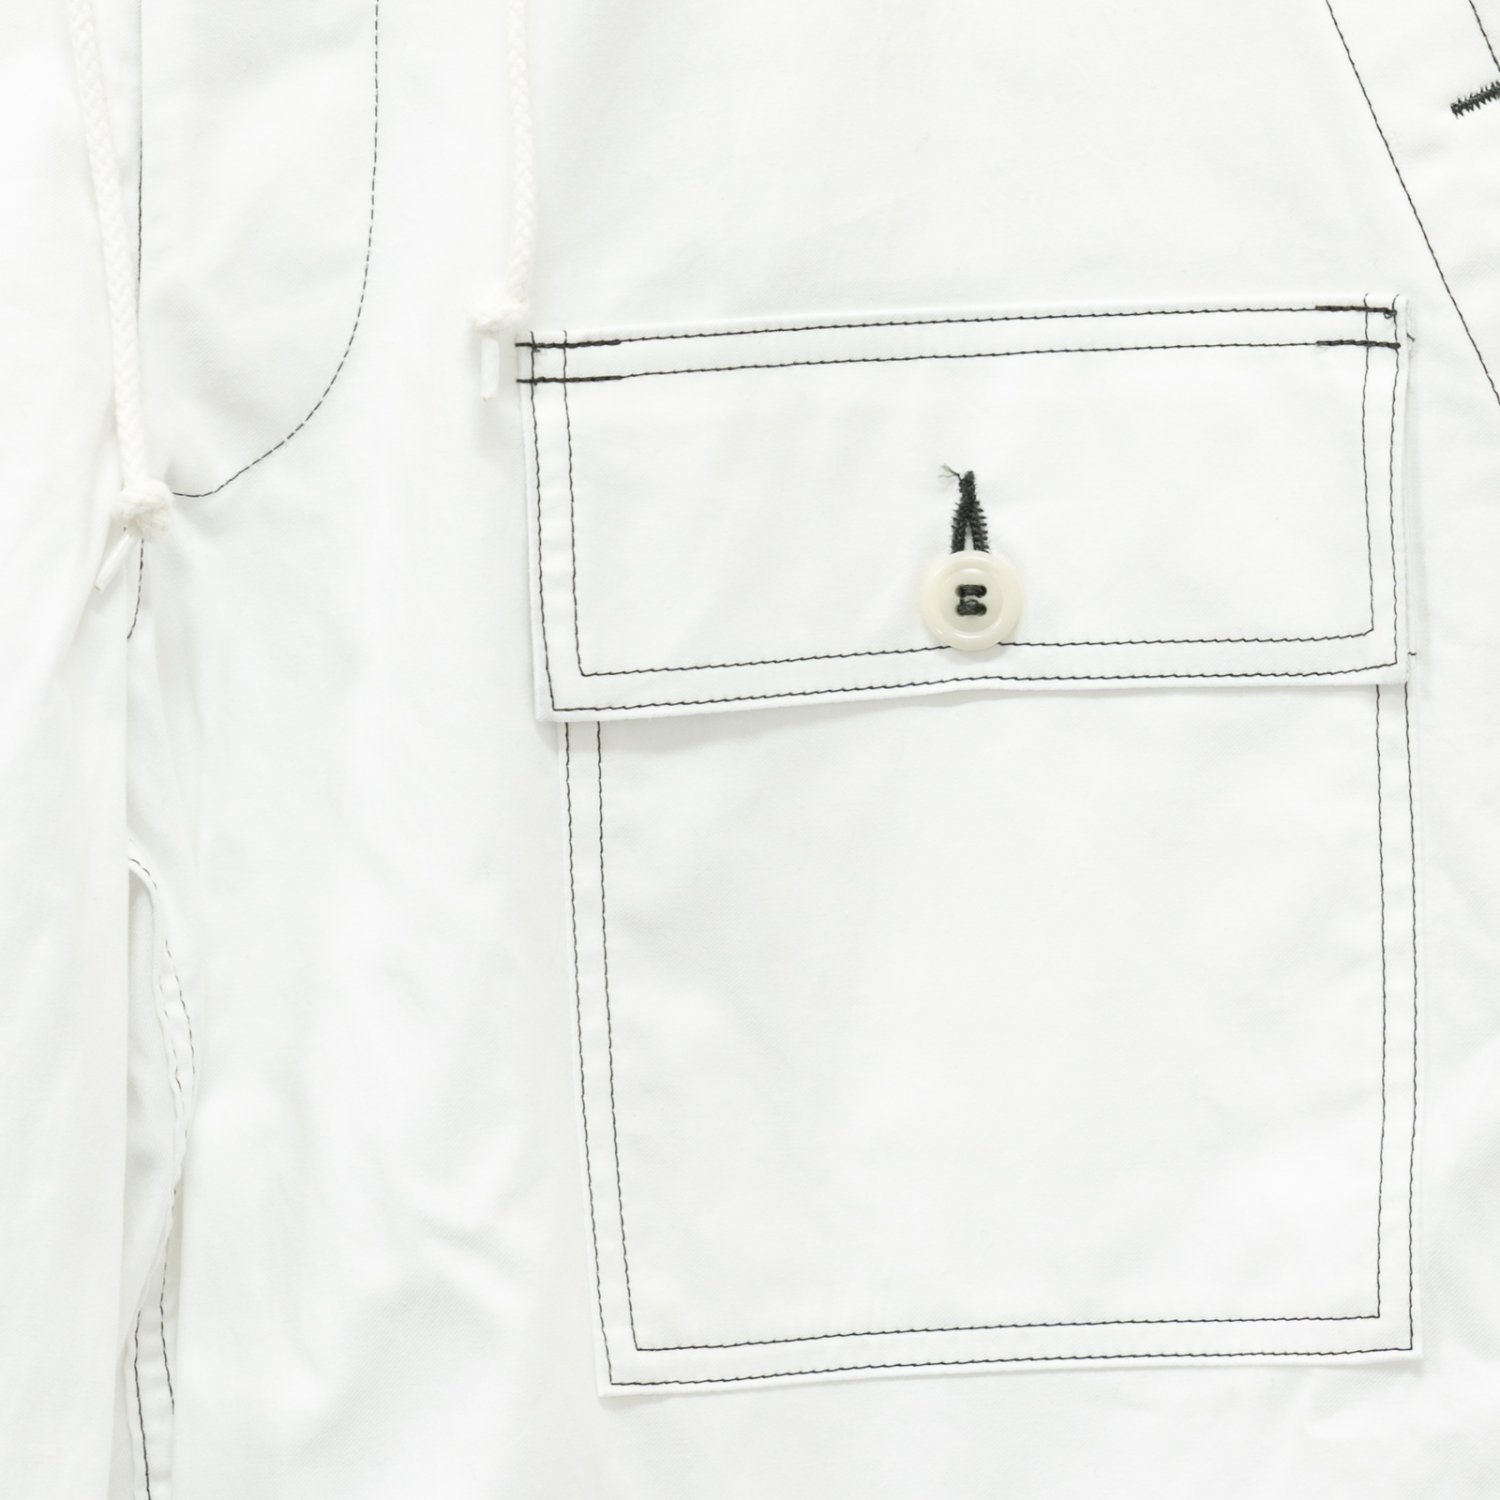 TUKISOLD OUT * 0131 Over Pants * White